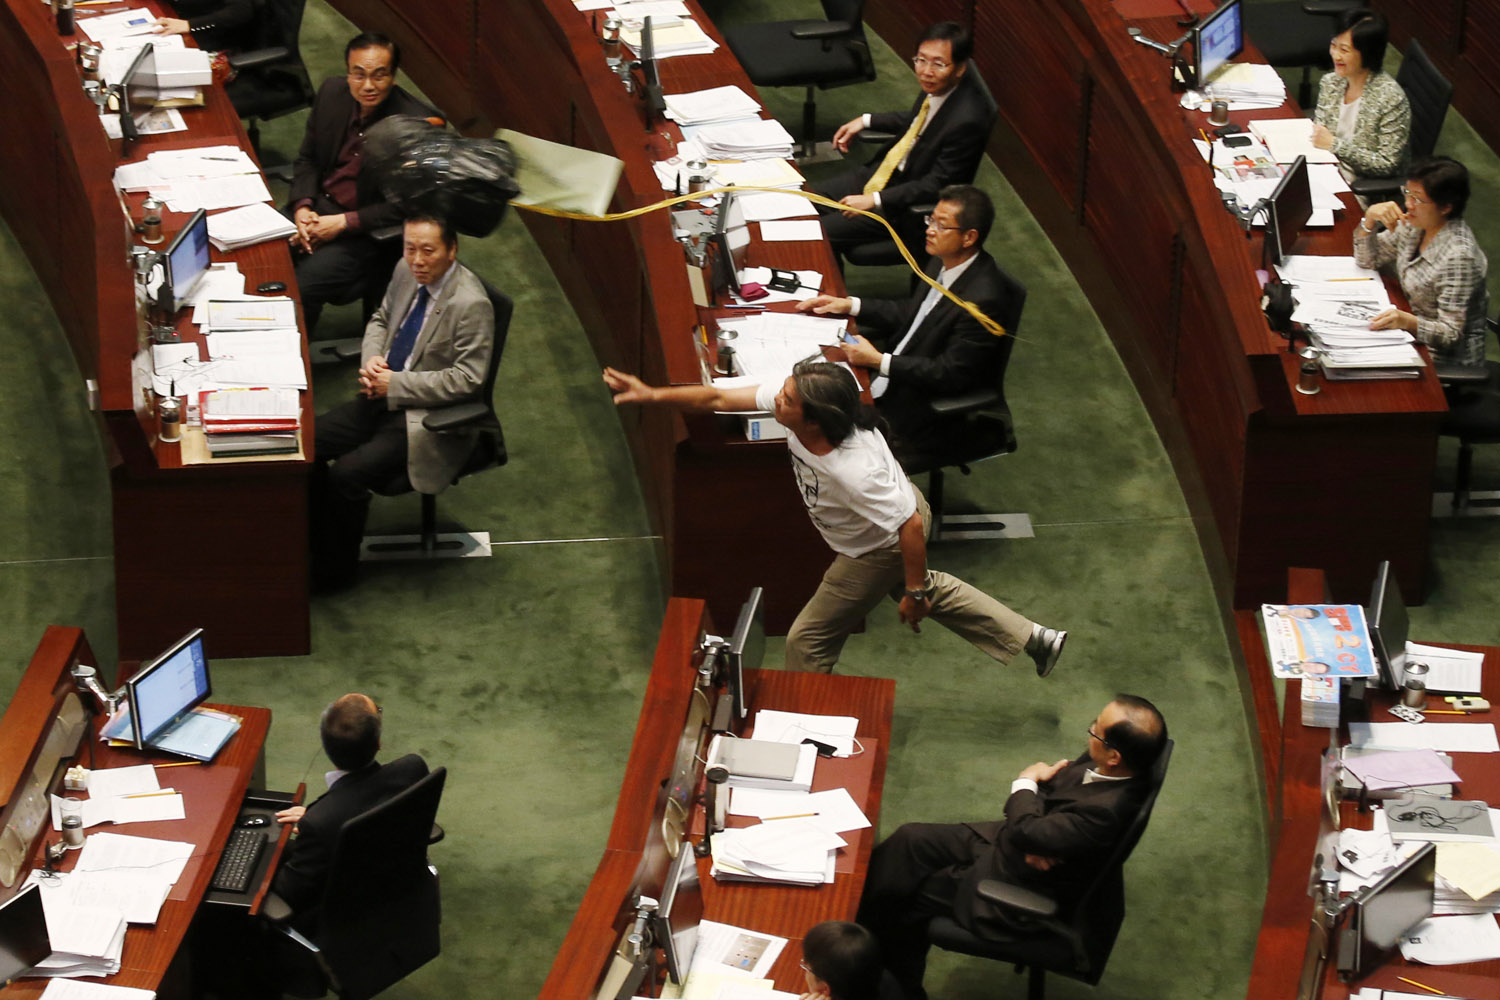 July 16, 2012. A member of the Legislative Council Leung Kwok-hung, also known as Long Hair, center, throws an effigy of the head of Chief Executive Leung Chun-ying to Leung during the first question-and-answer session in Hong Kong.